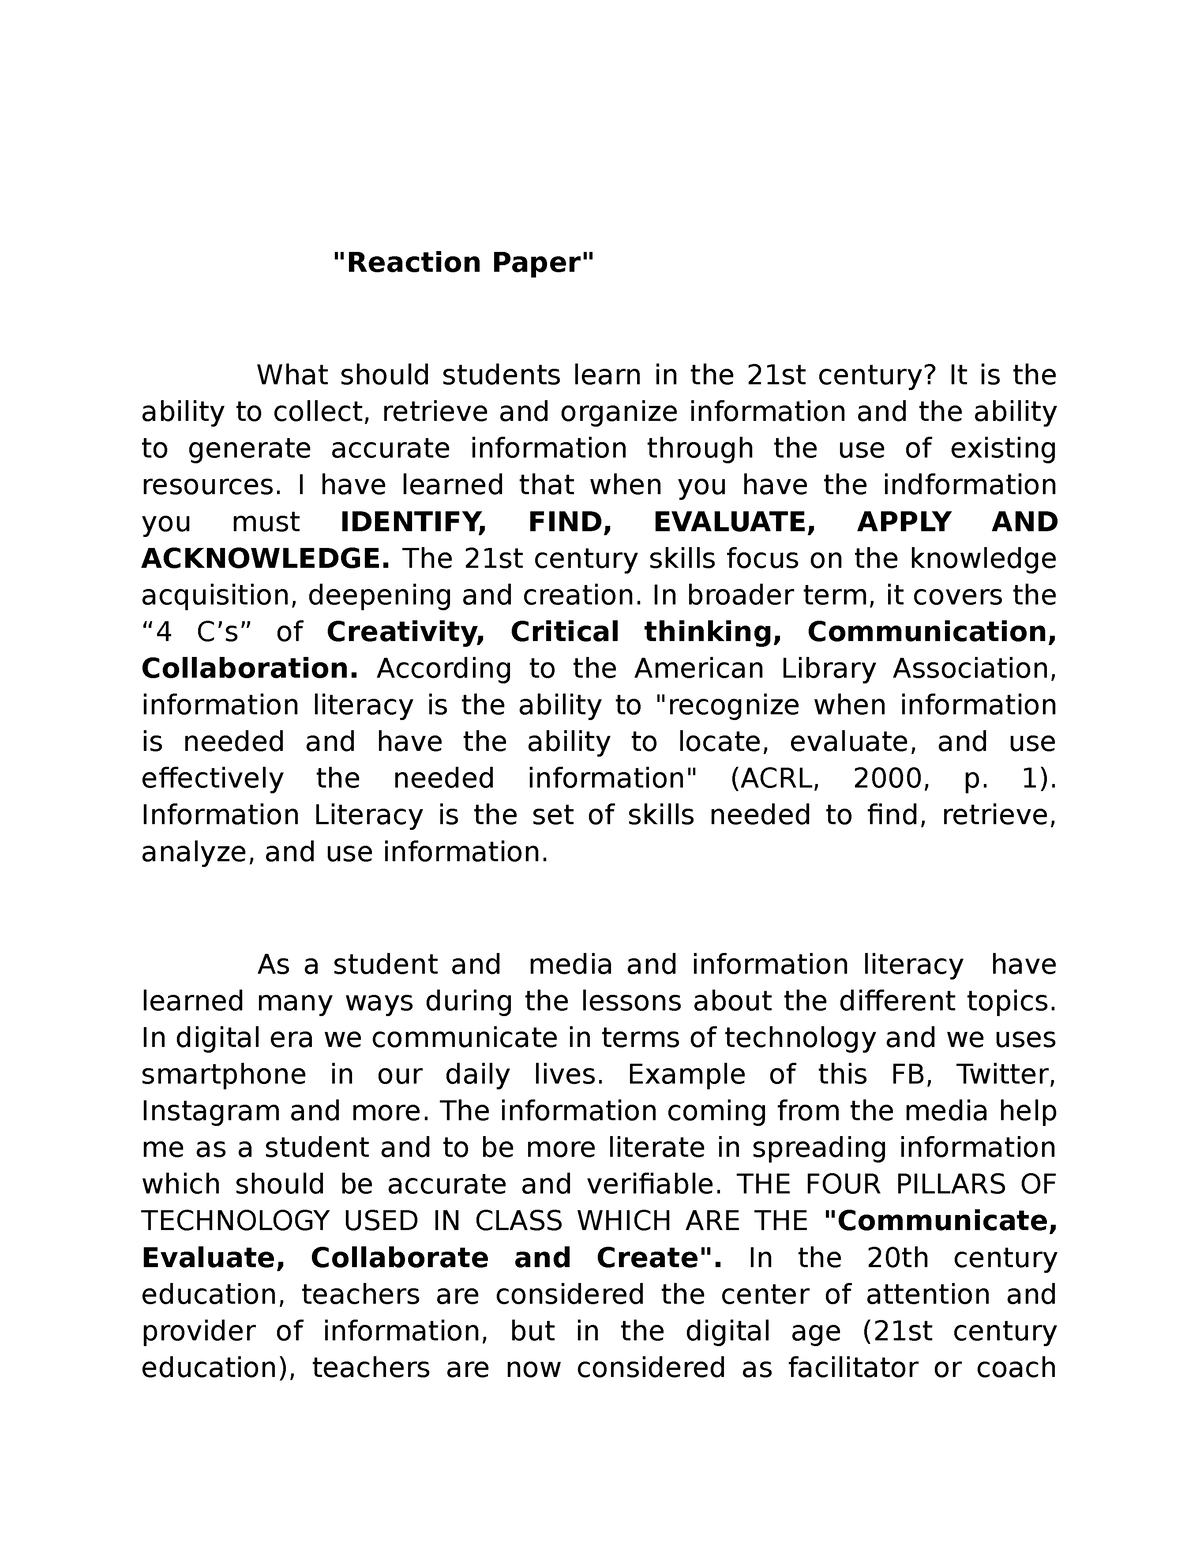 essay about the media and information literacy